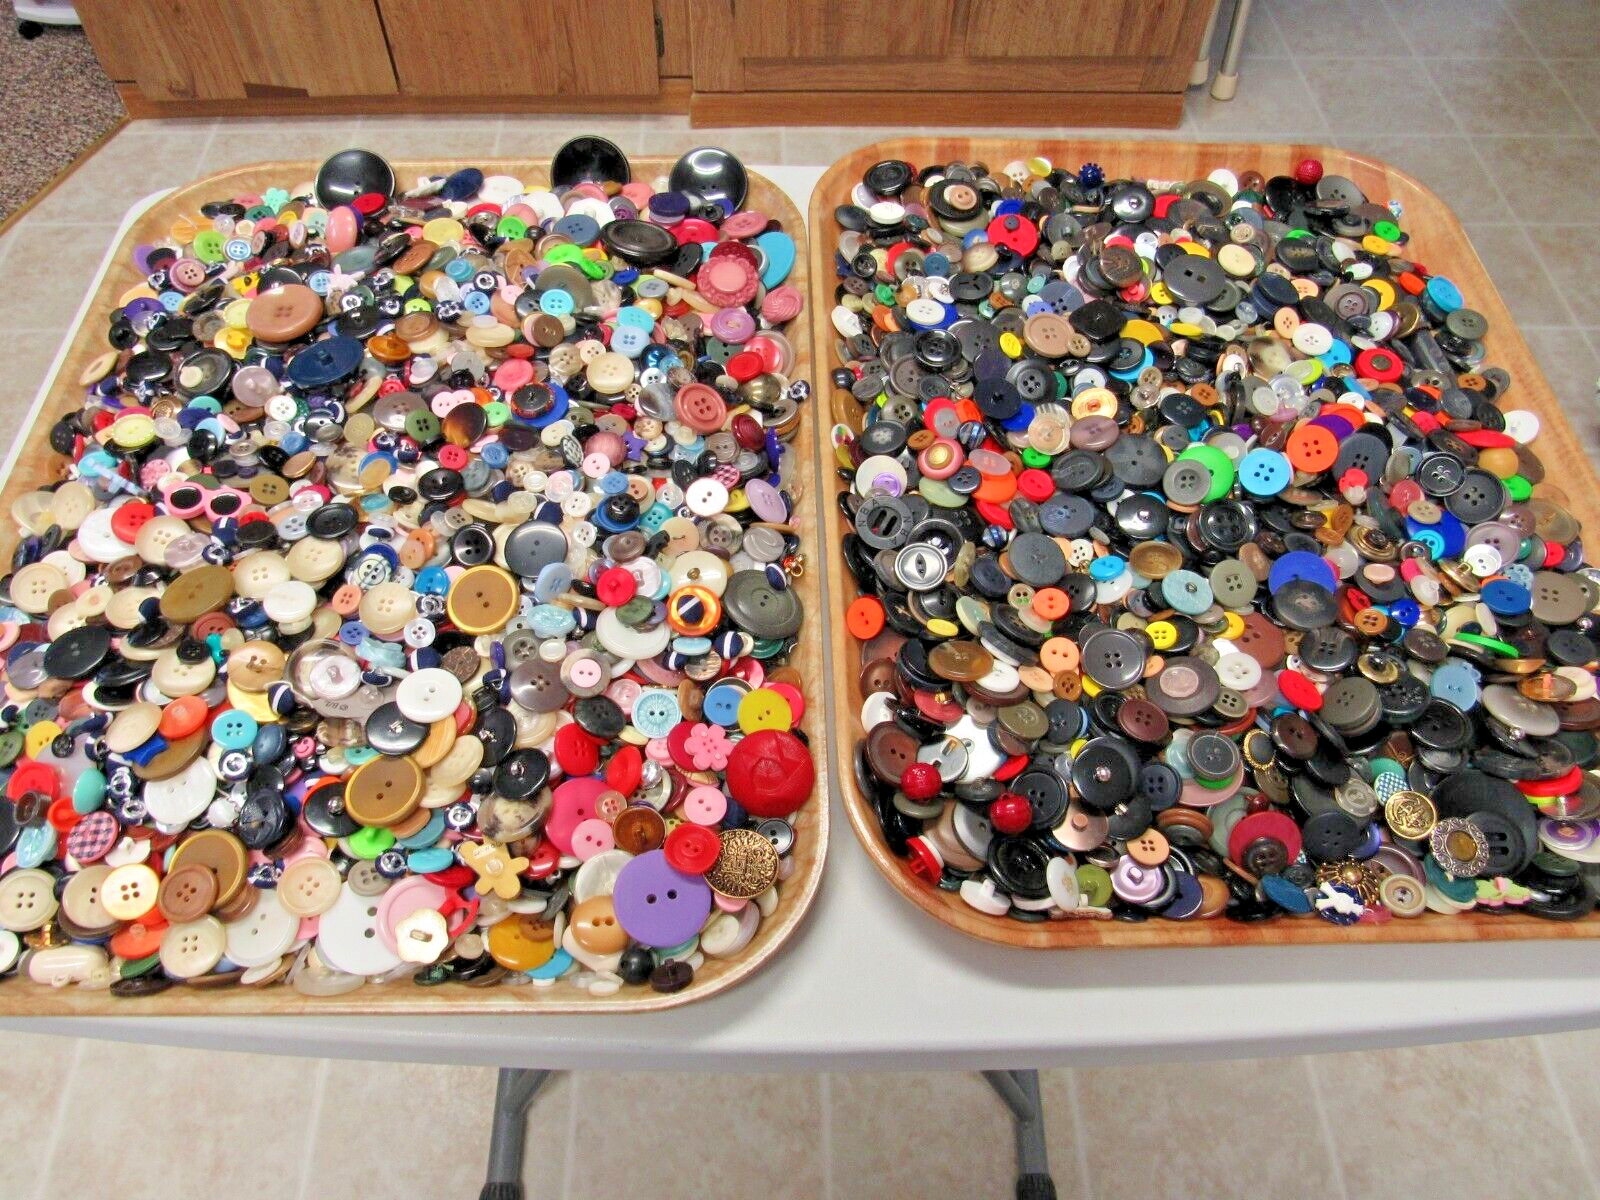 LOT OF SEWING BUTTONS CRAFTS ASSORTED SIZES SHAPES COLORS VINTAGE MOD 10 LBS